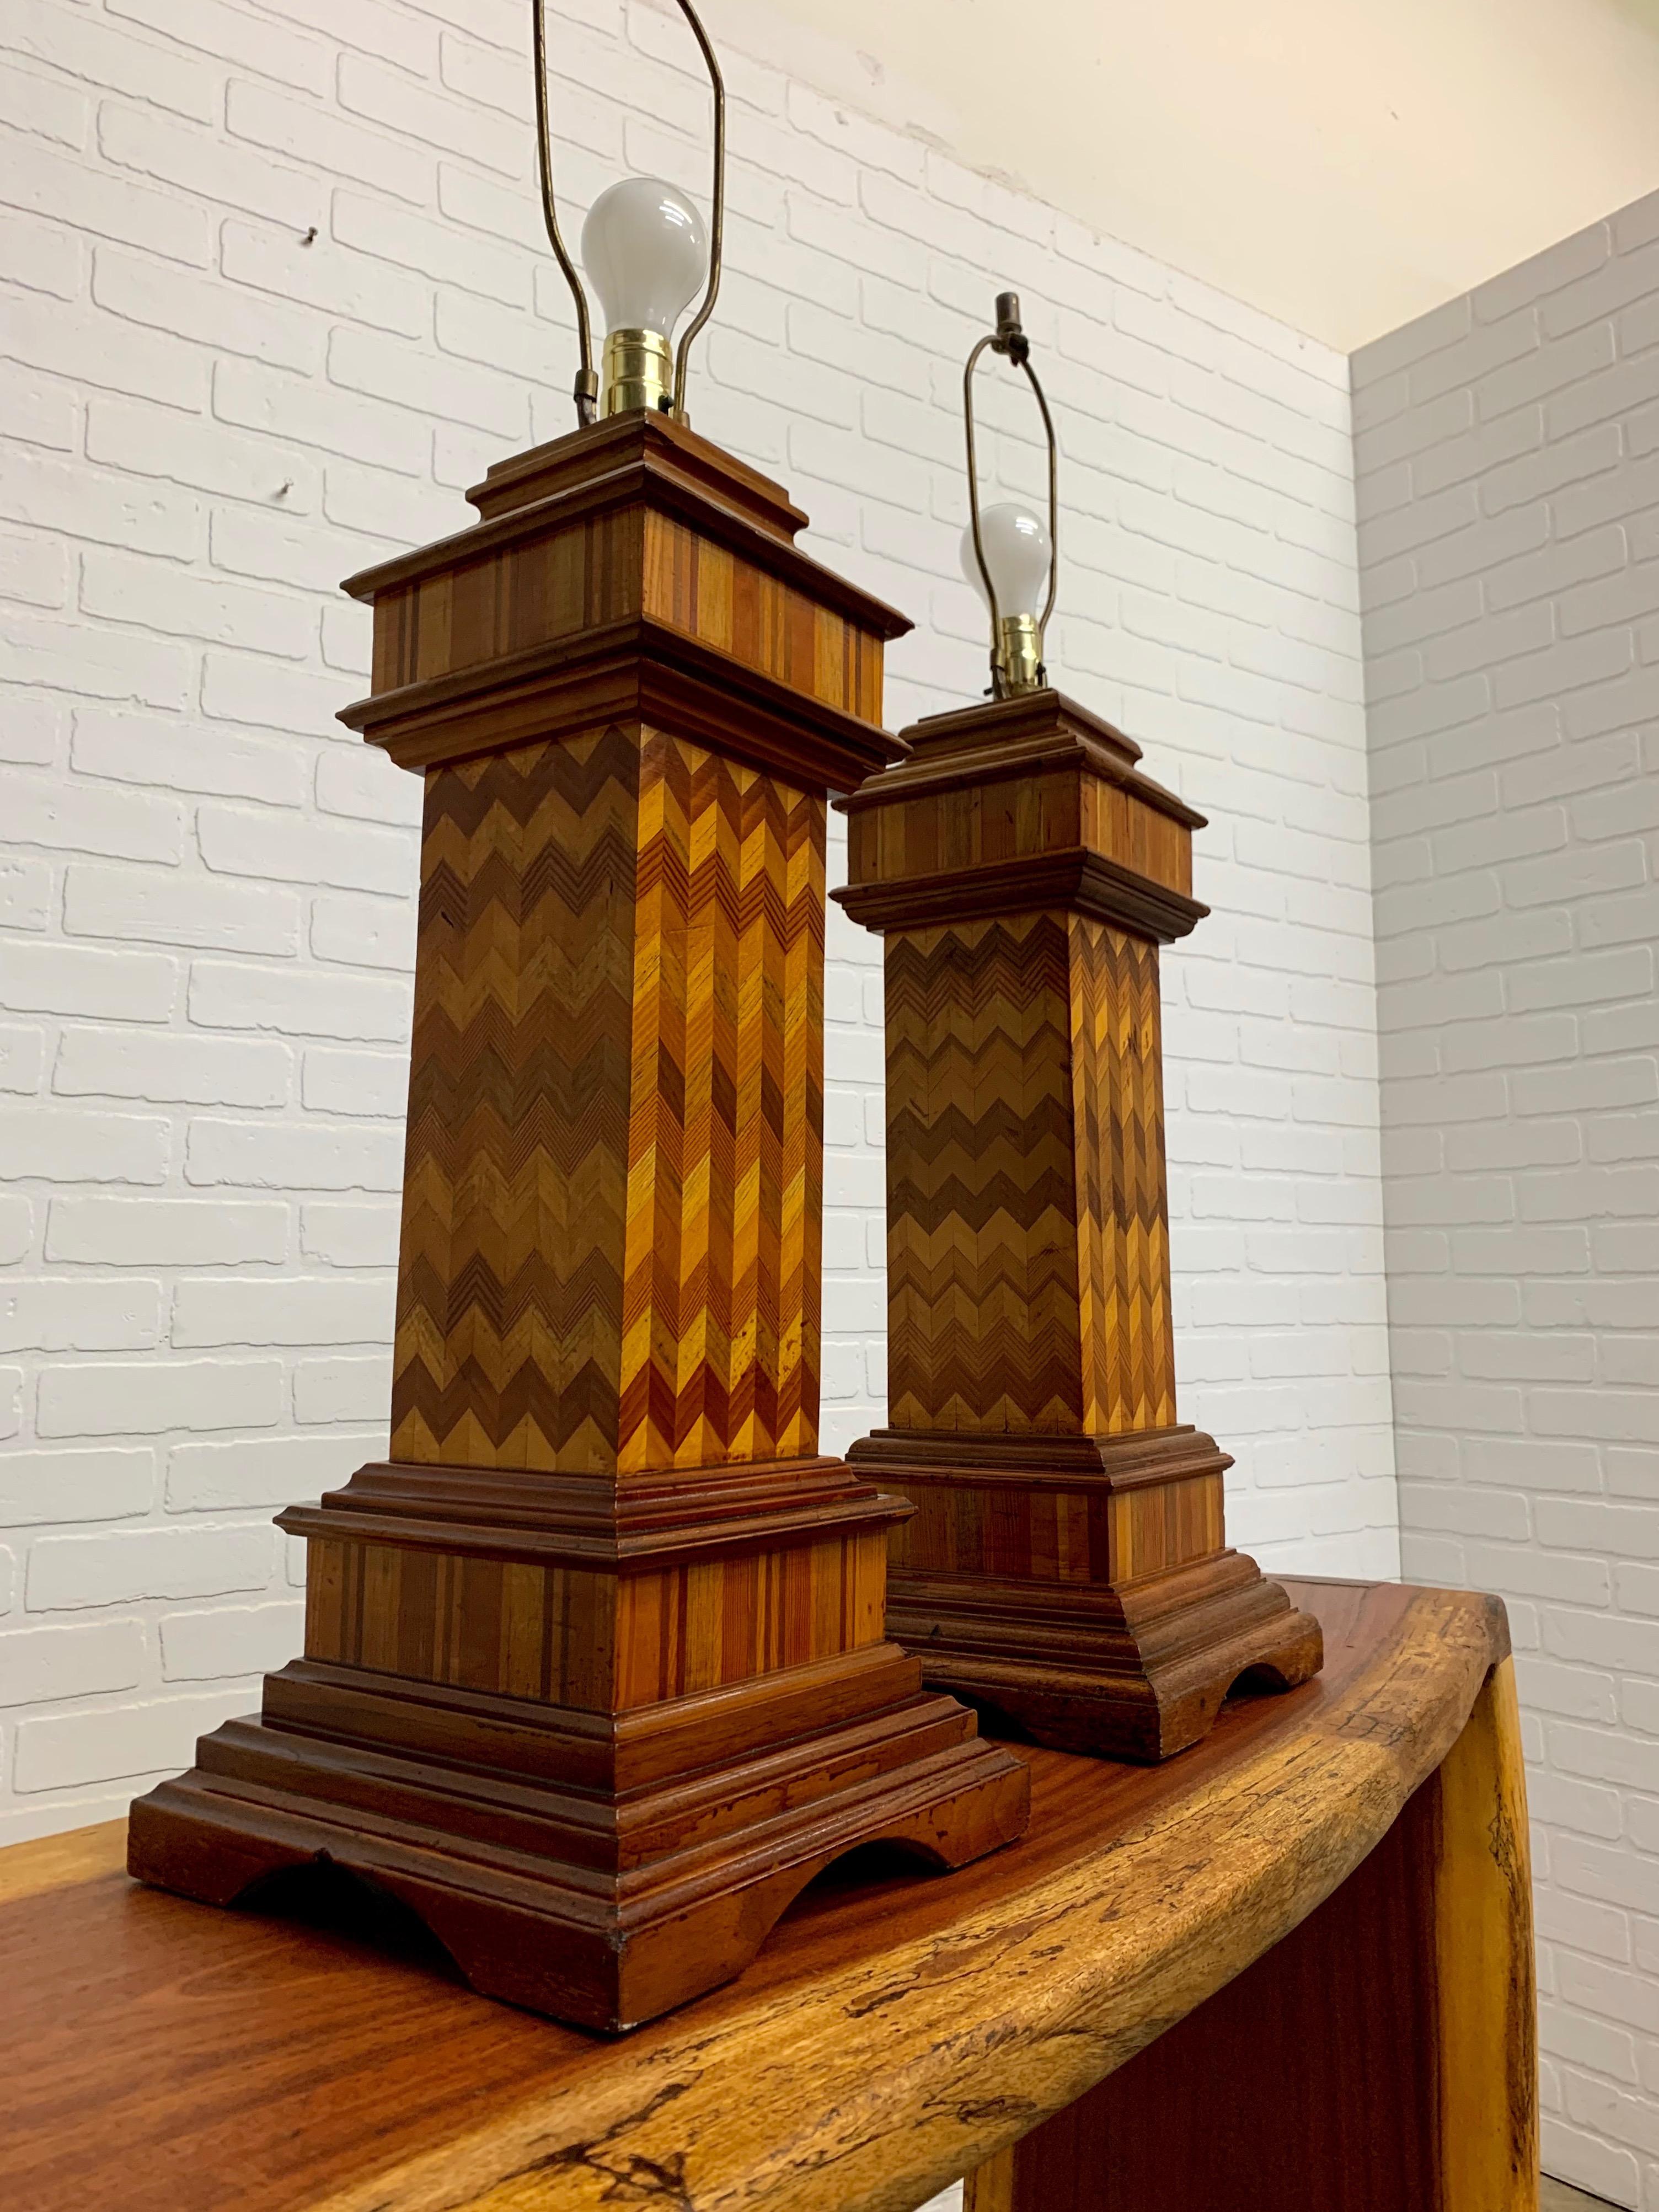 Antique Wood Lamps Made of Architectural Elements 3